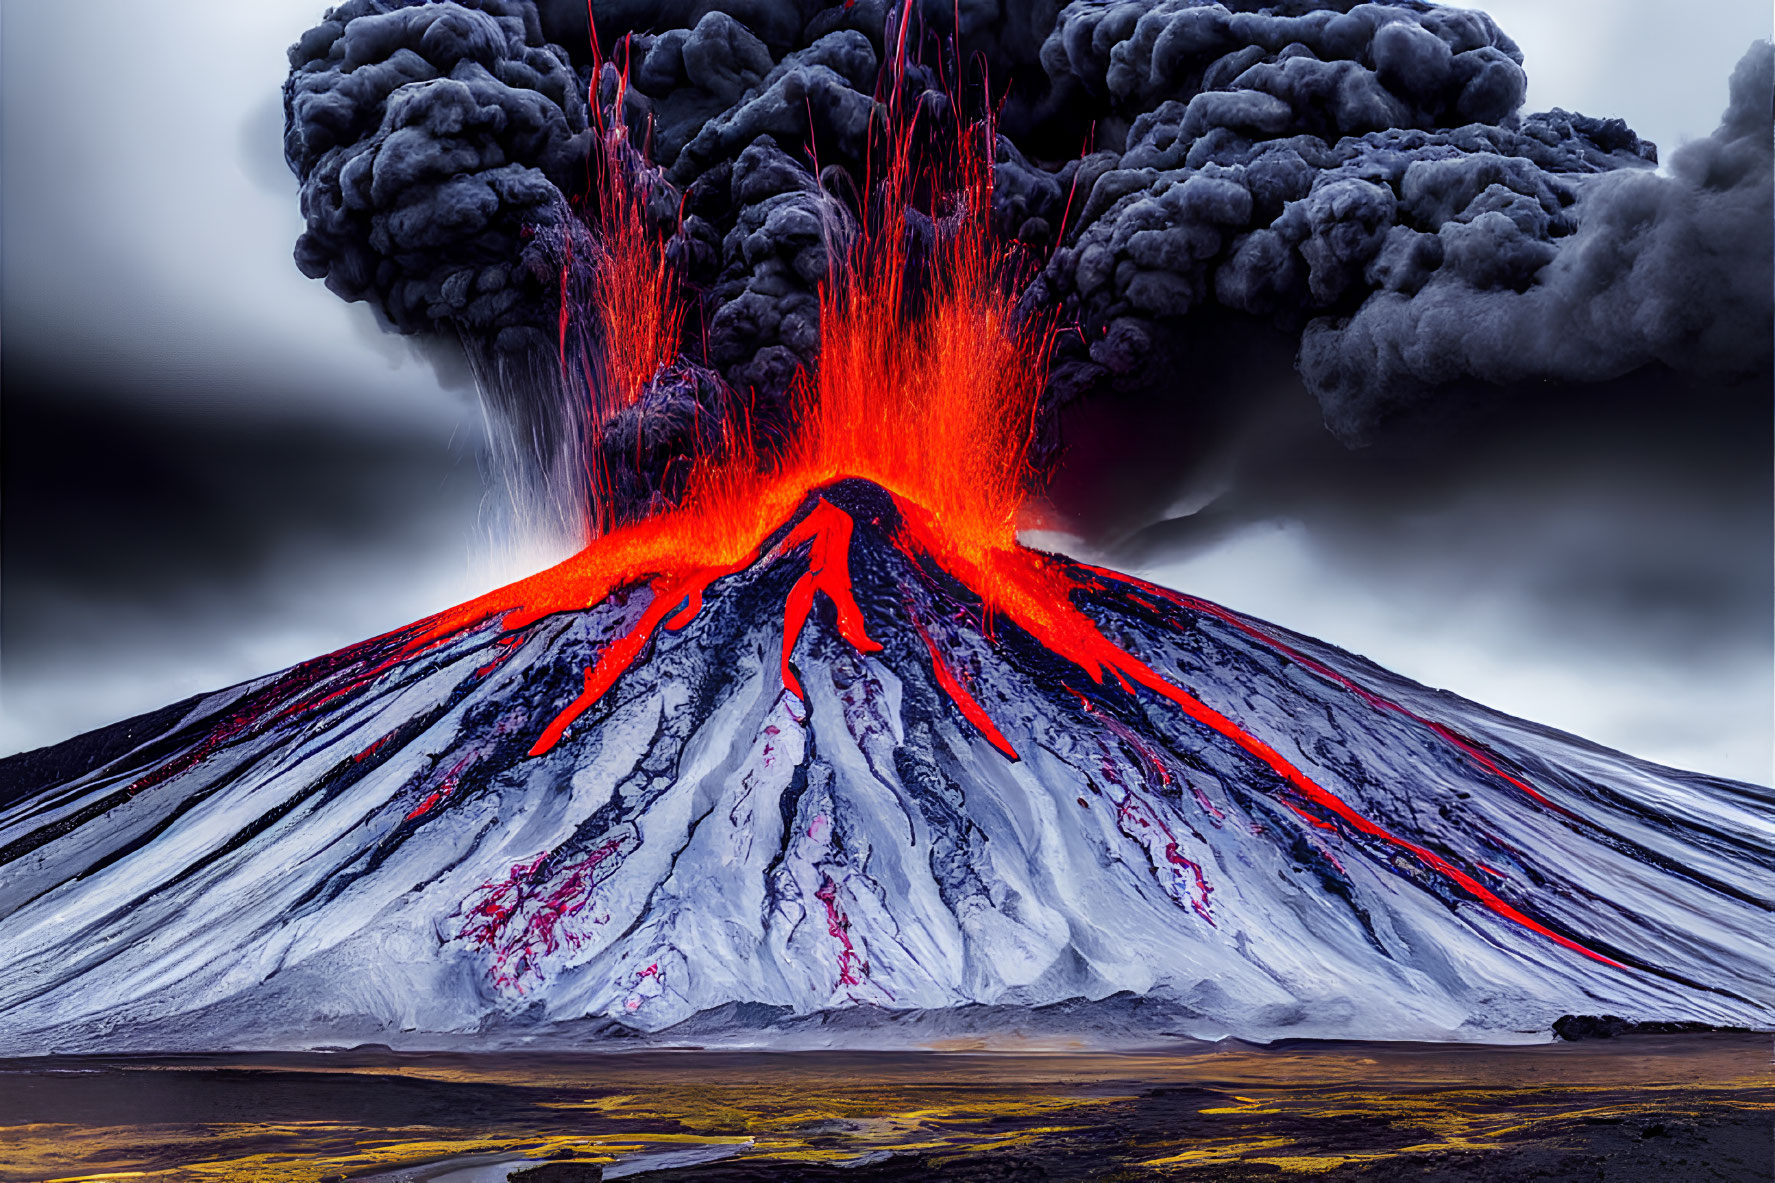 Volcano Eruption: Red-Hot Lava, Ash Clouds, Snowy Slopes